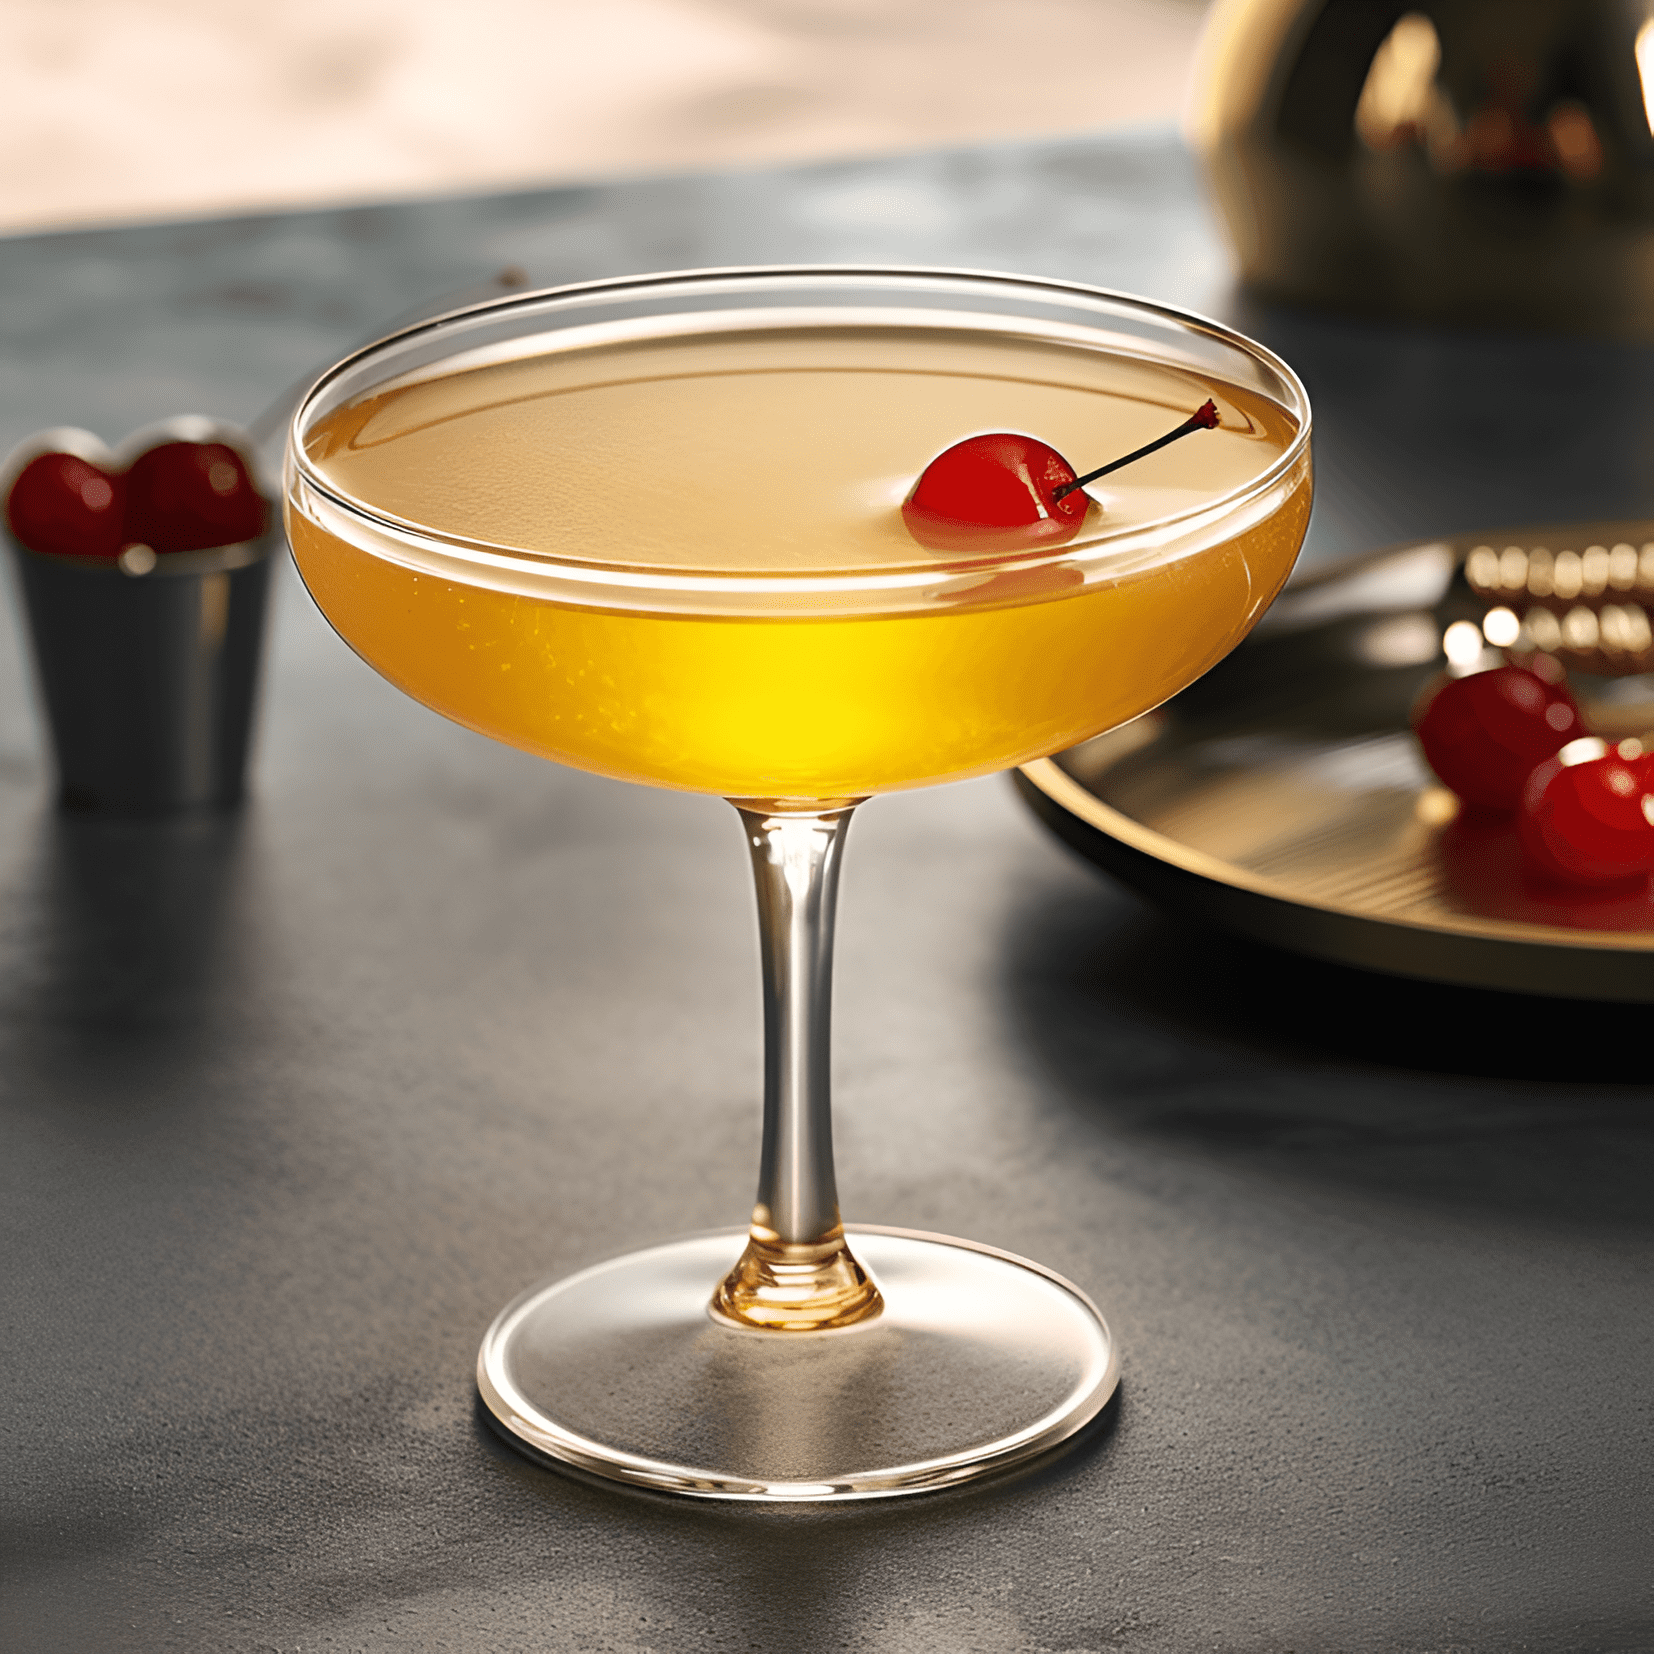 Panama Cocktail Recipe - The Panama cocktail has a sweet and fruity taste with a hint of sourness. It is a well-balanced drink that combines the flavors of pineapple, orange, and lime. The rum adds a smooth and slightly spicy kick, while the grenadine provides a touch of sweetness.